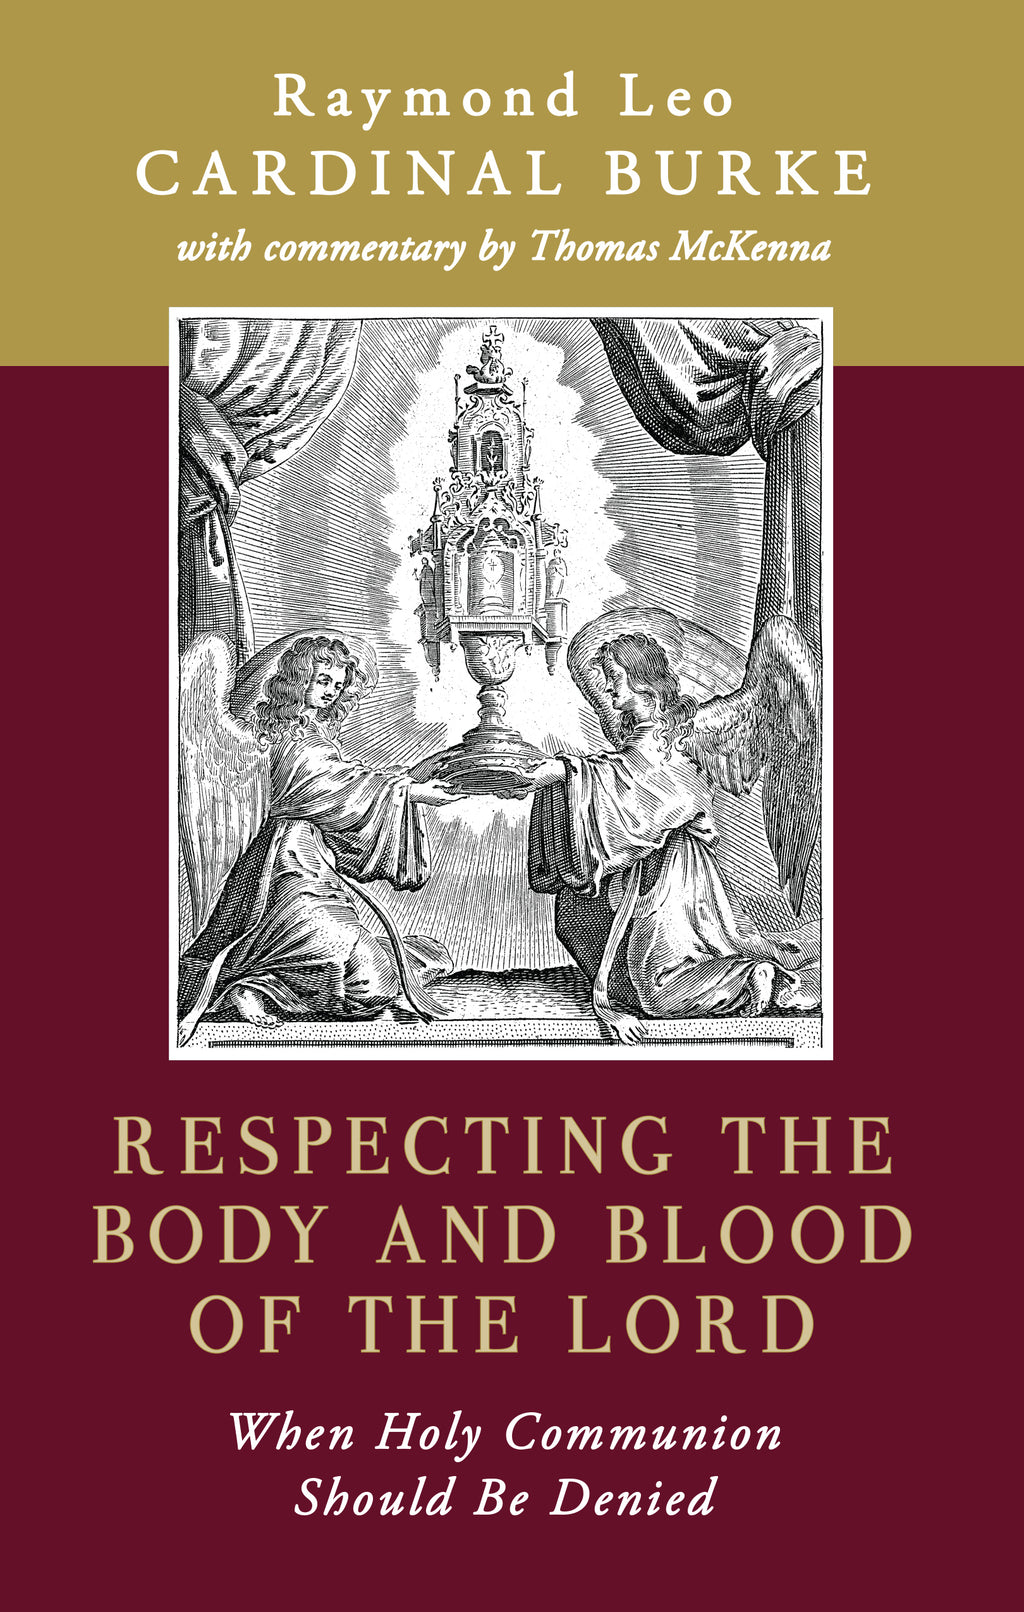 RESPECTING THE BODY AND BLOOD